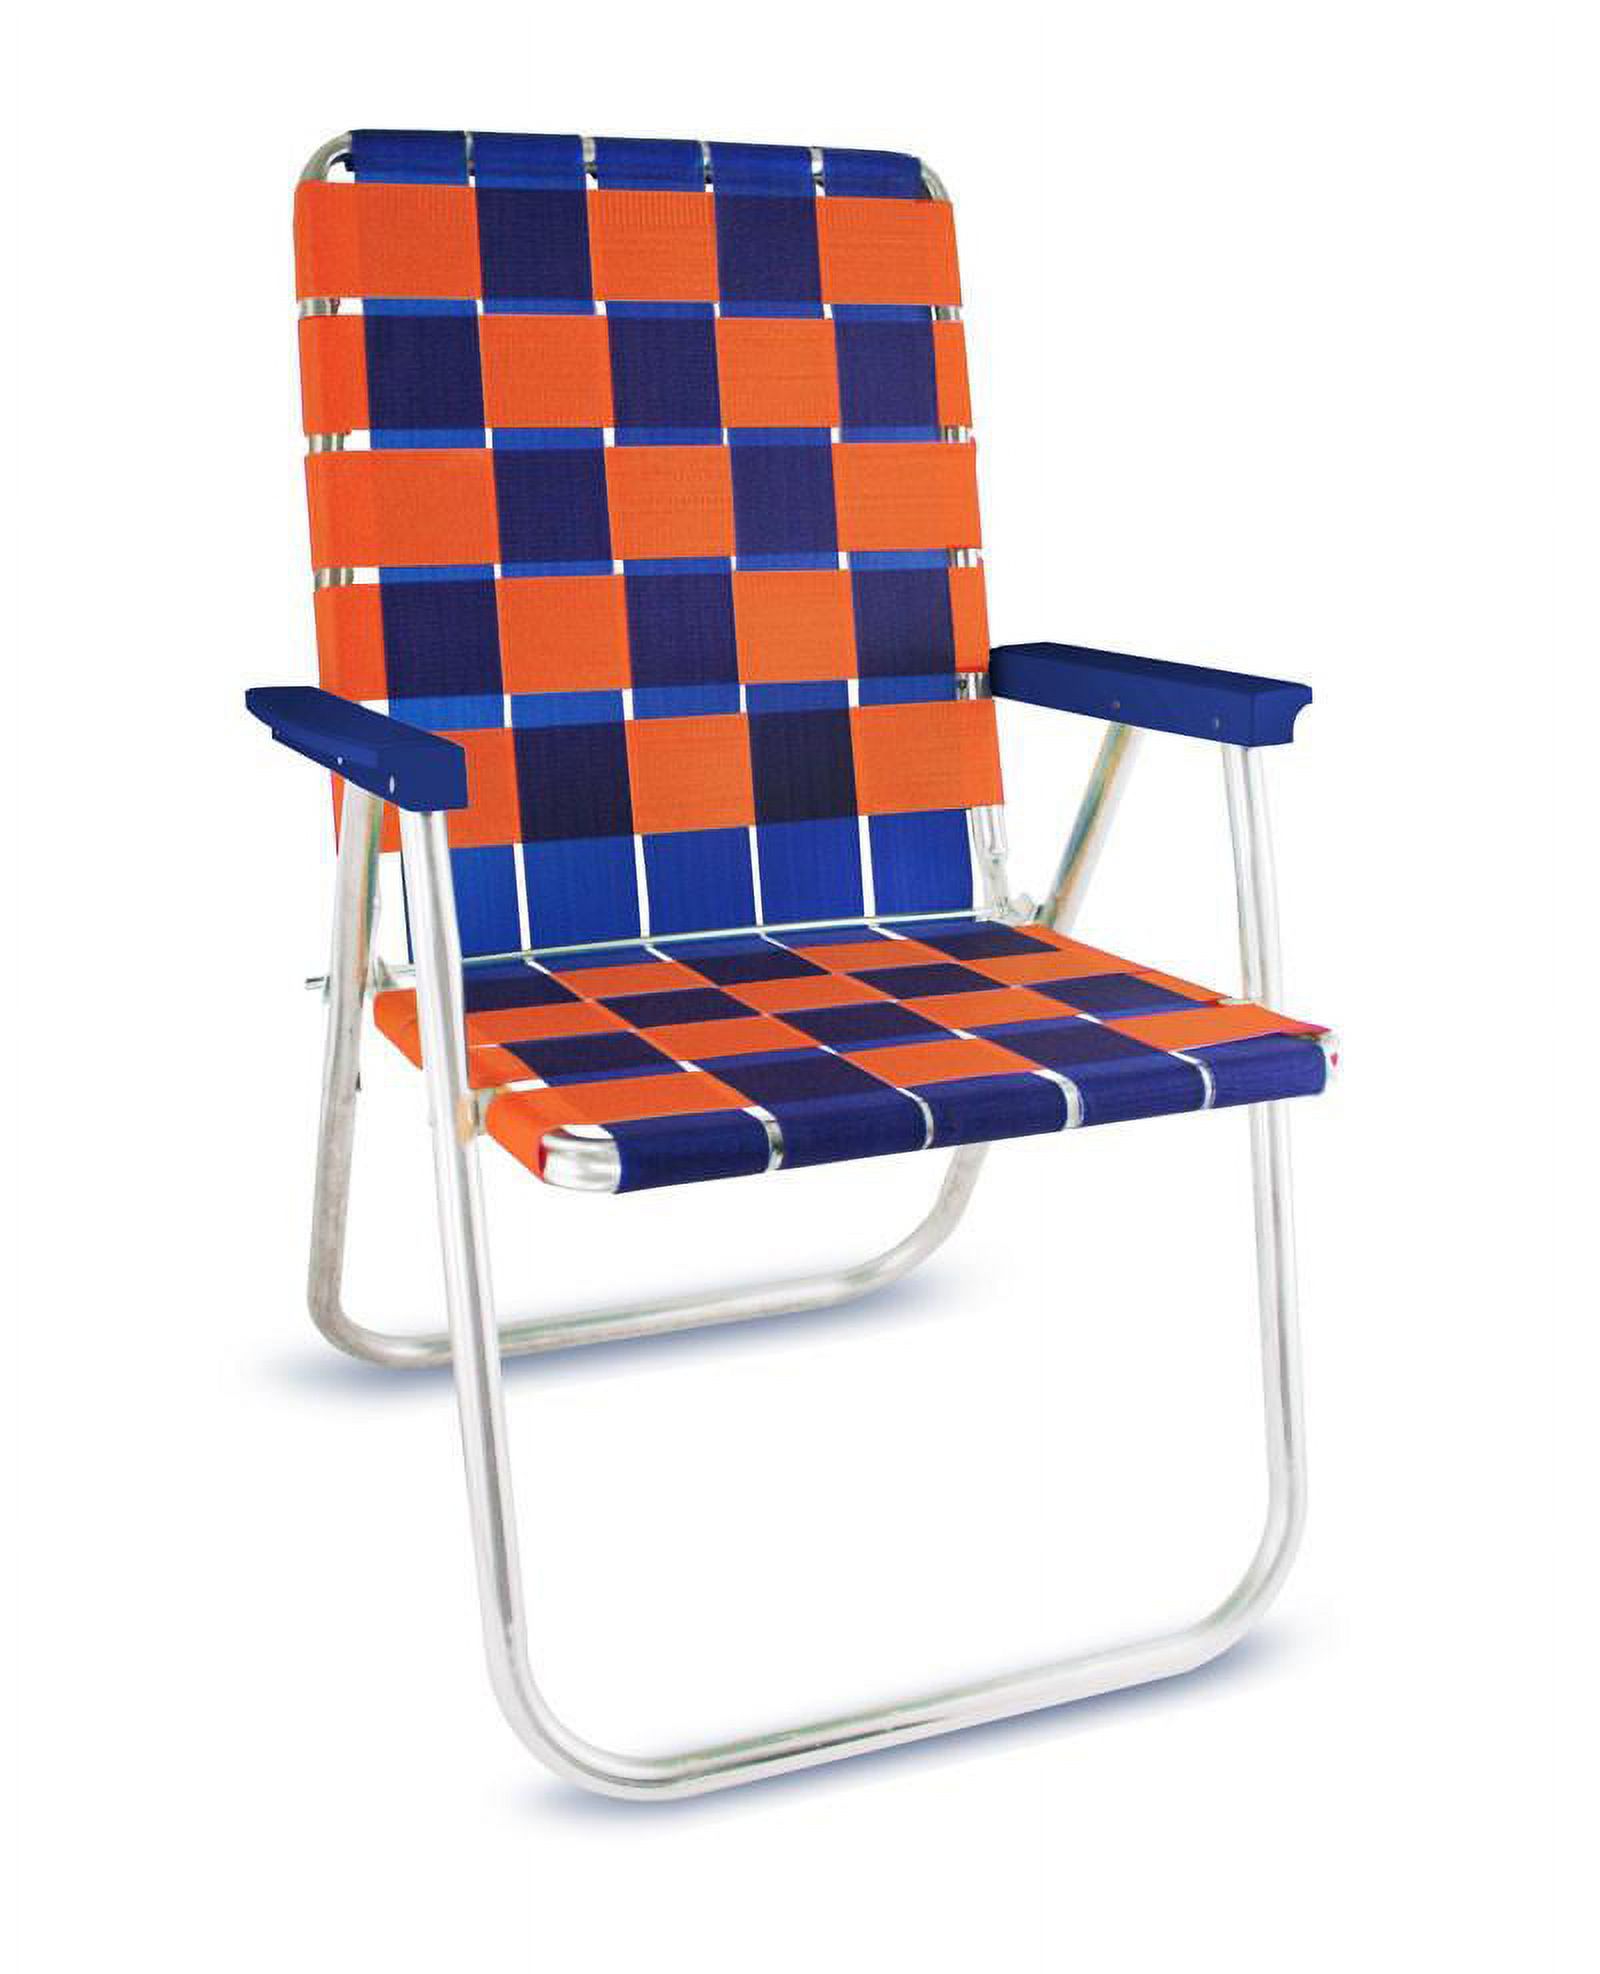 Lawn Chair USA Classic Folding Aluminum Webbed Chair | Blue/ Orange with Blue Arms - image 1 of 7